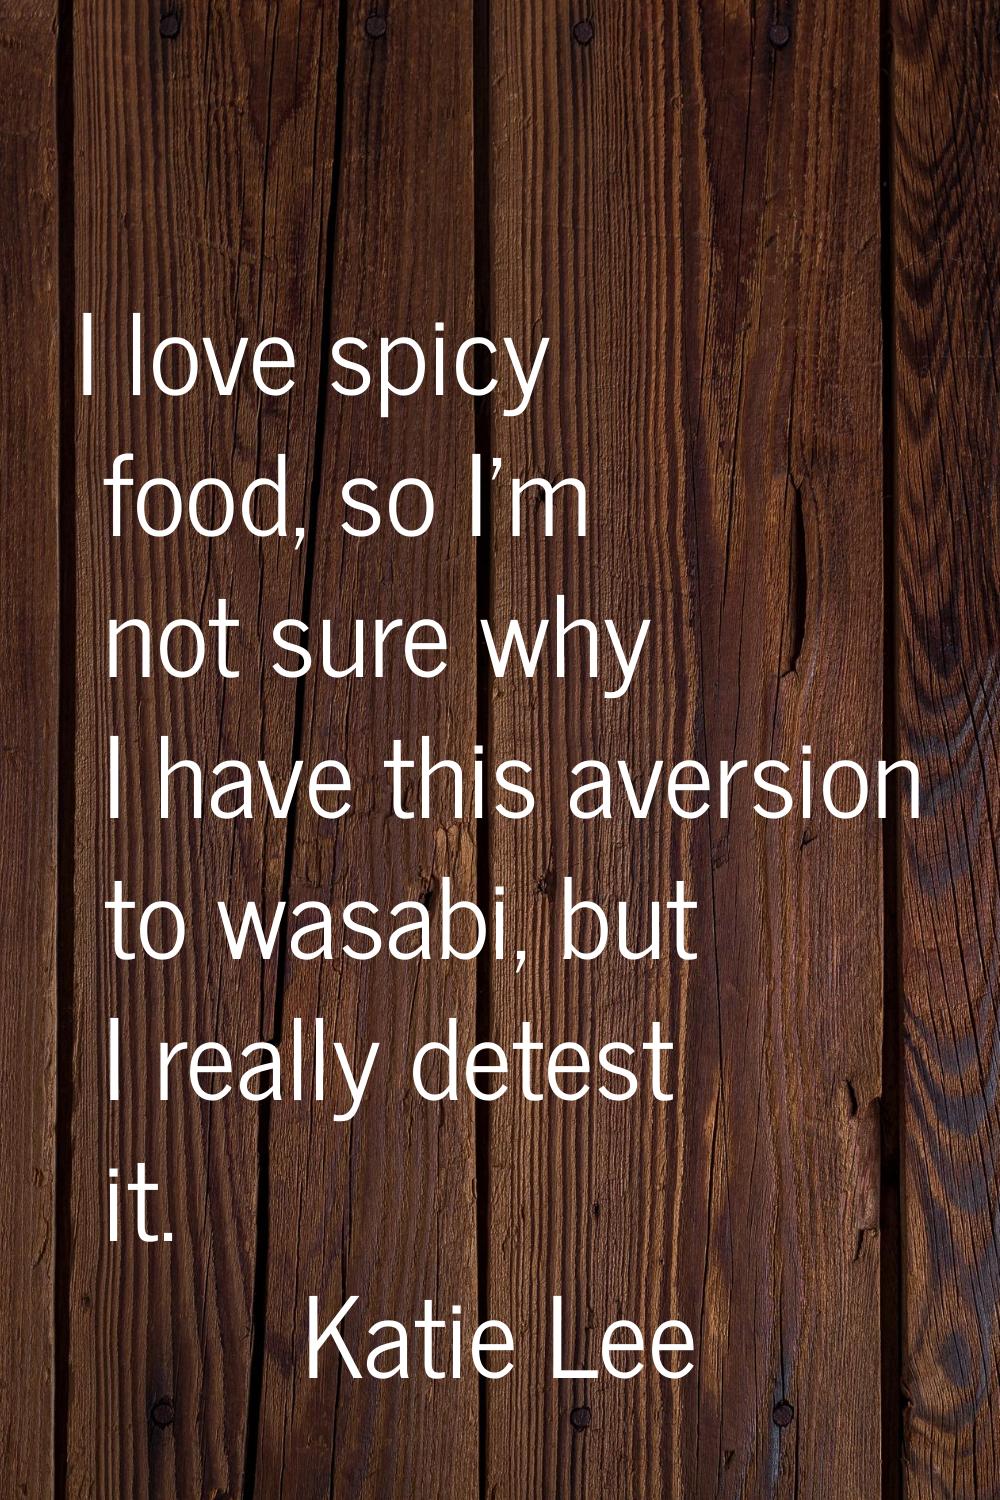 I love spicy food, so I'm not sure why I have this aversion to wasabi, but I really detest it.